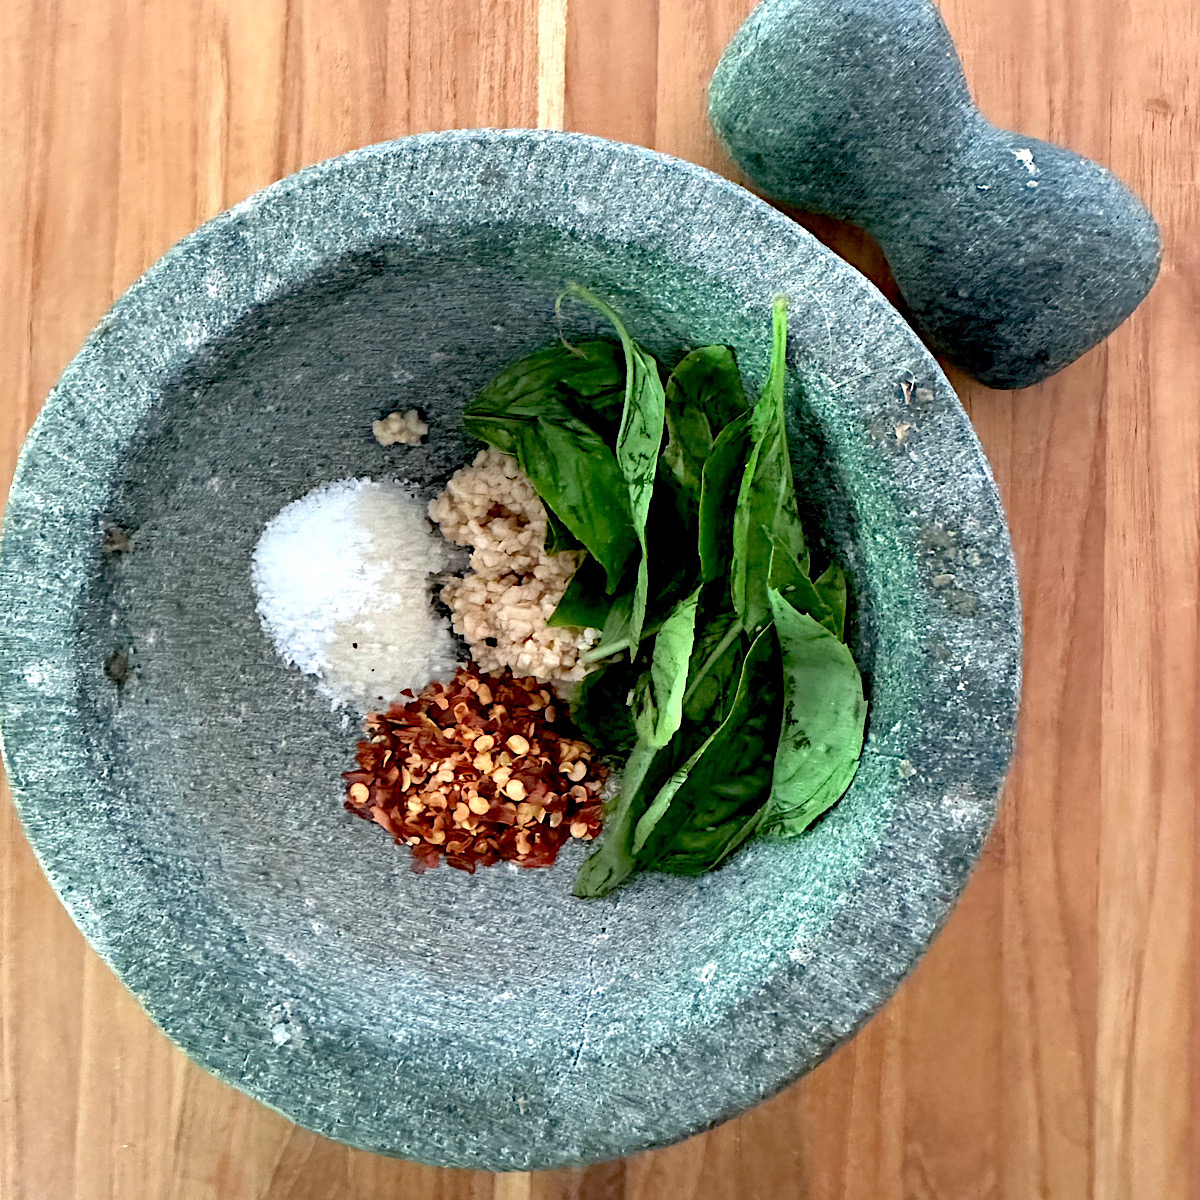 Red peppers, salt, garlic and basil leaves in a mortar and pestle